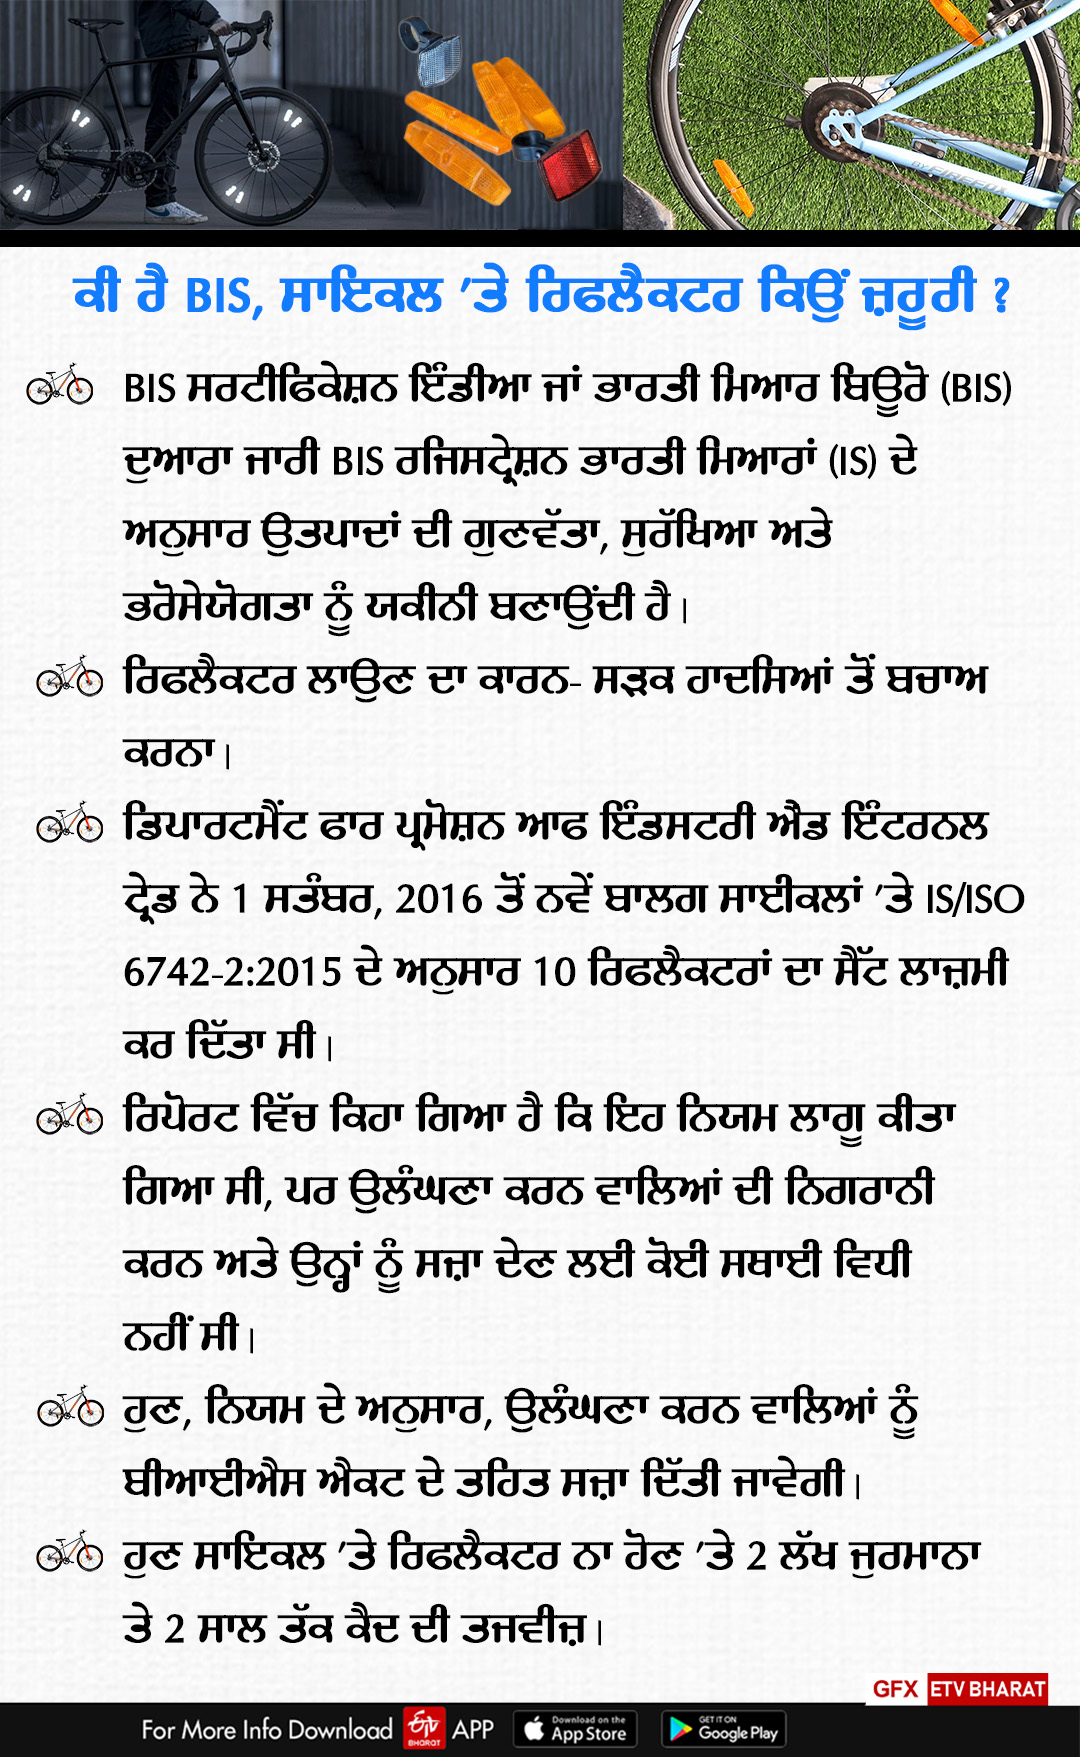 BIS certified reflectors on the bicycle, Ludhiana